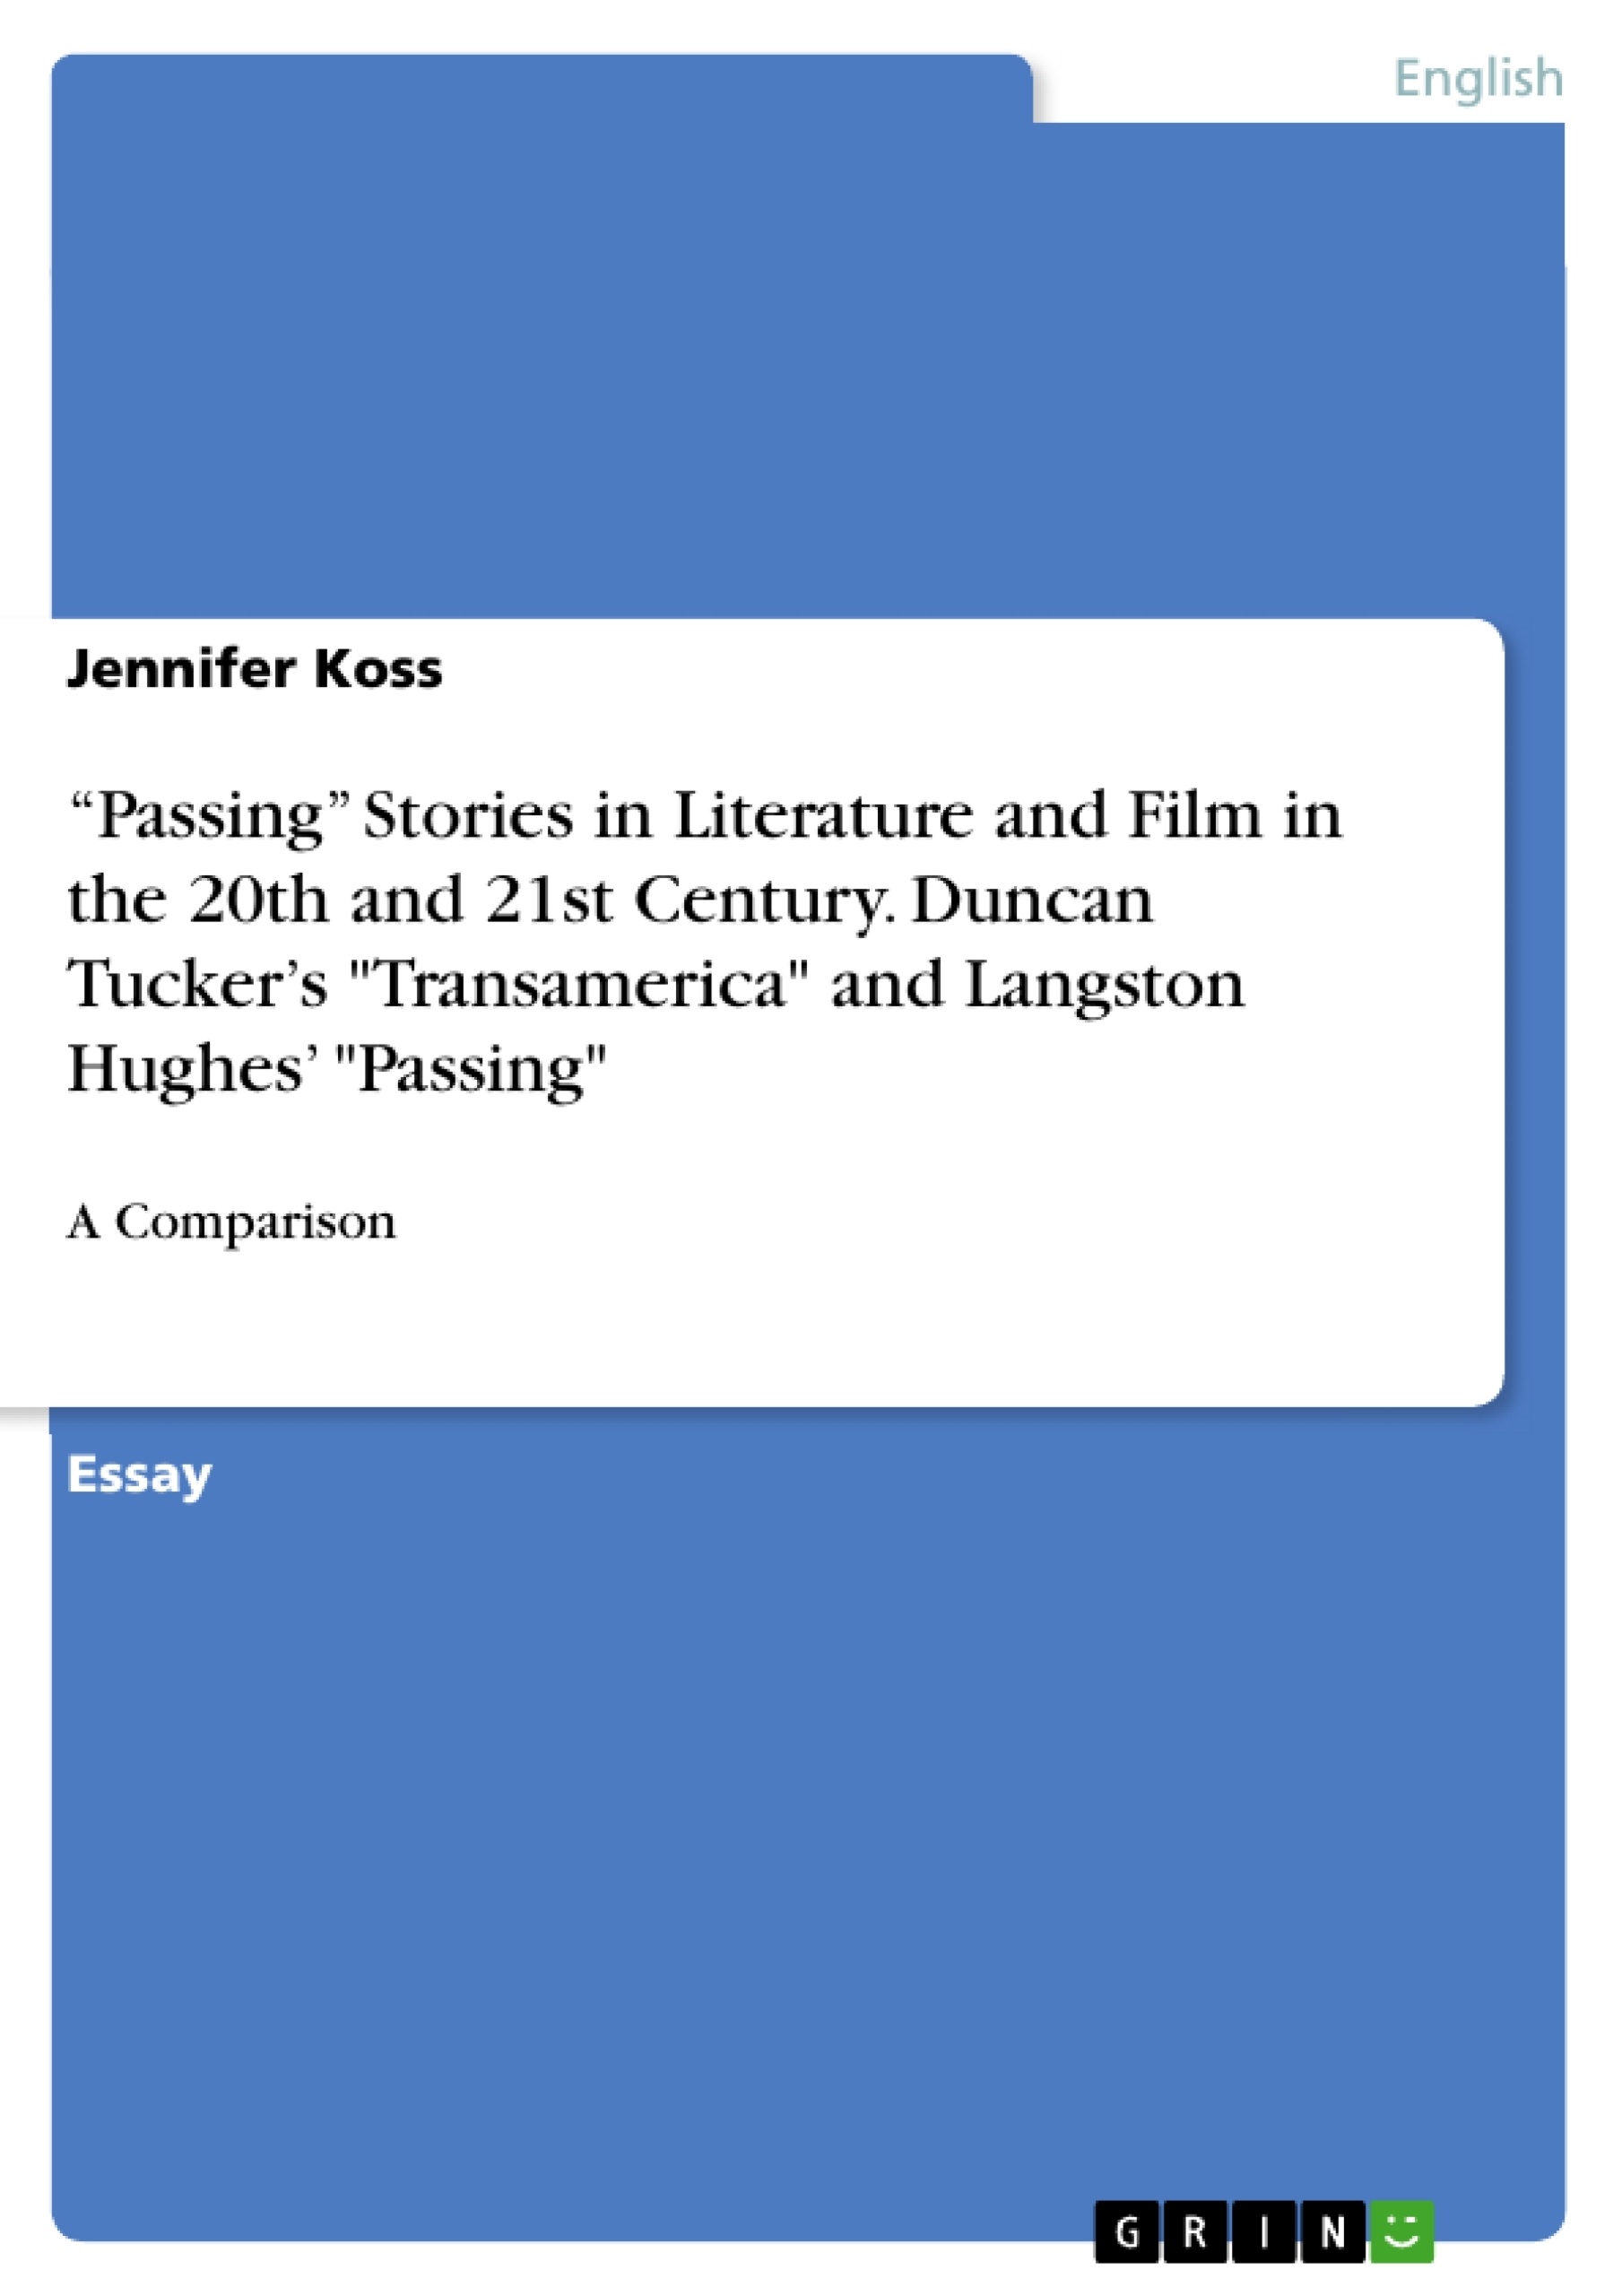 Título: “Passing” Stories in Literature and Film in the 20th and 21st Century. Duncan Tucker’s "Transamerica" and Langston Hughes’ "Passing"